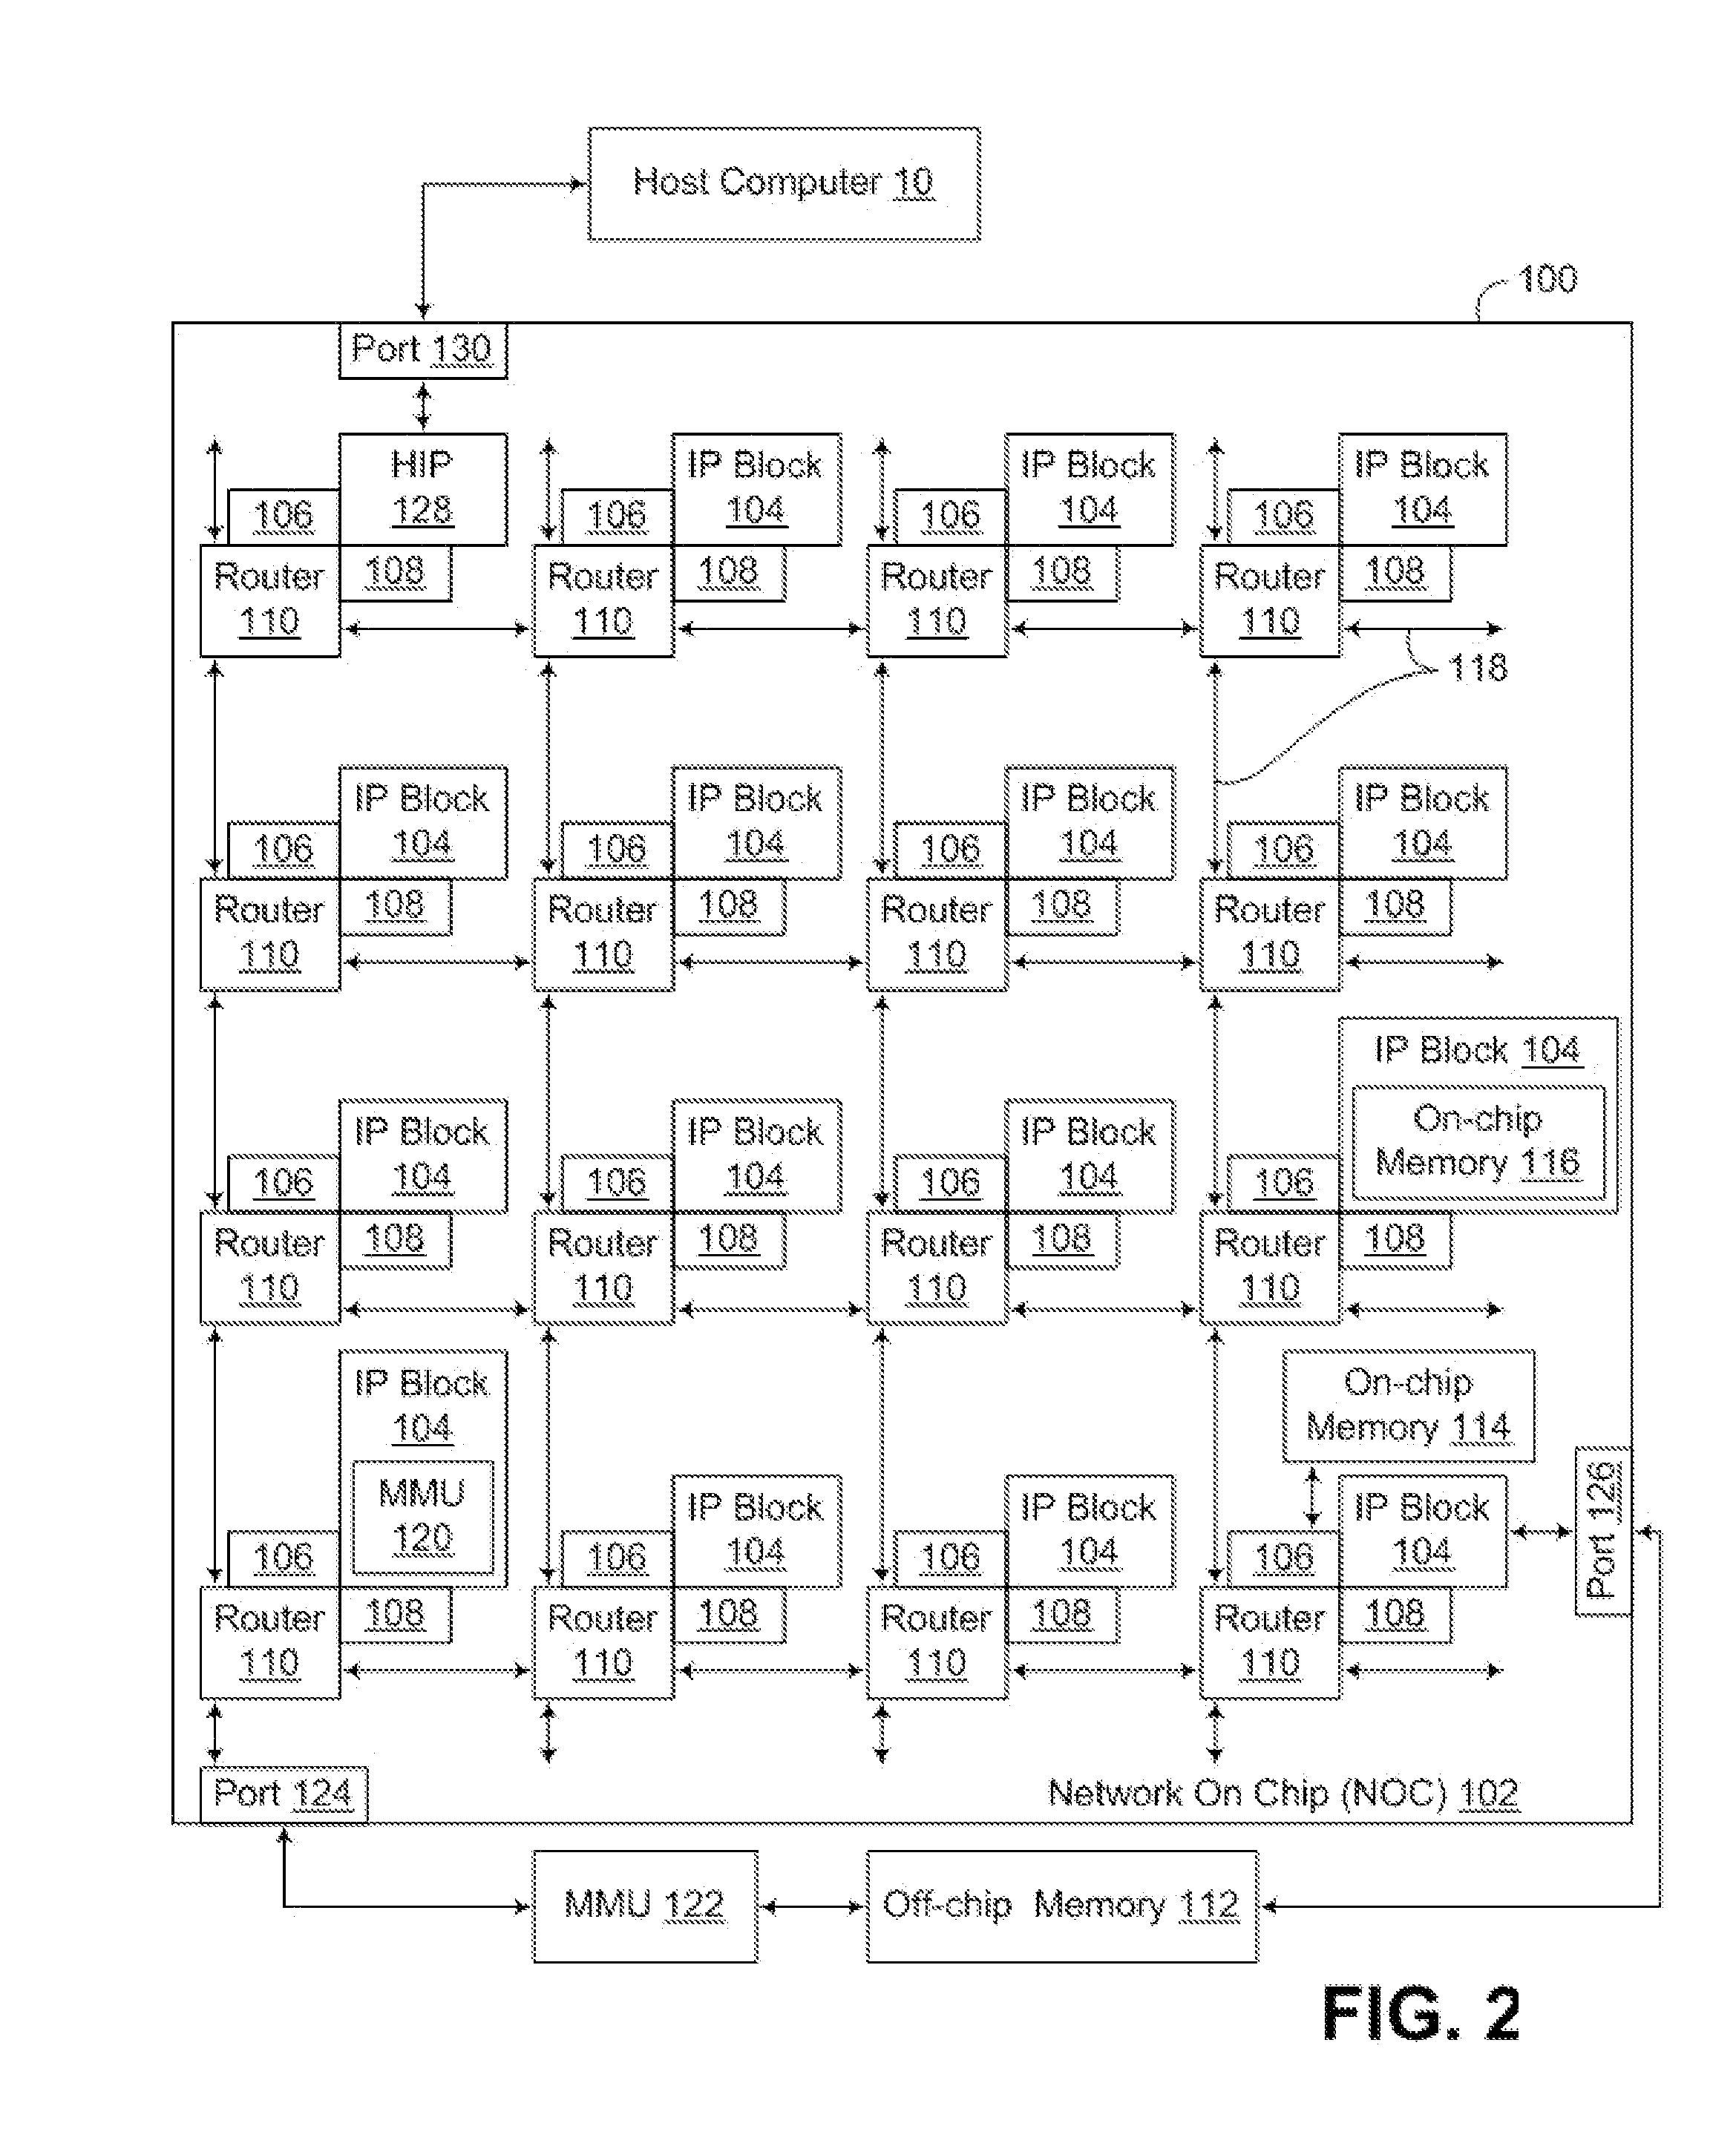 Processor with hybrid pipeline capable of operating in out-of-order and in-order modes